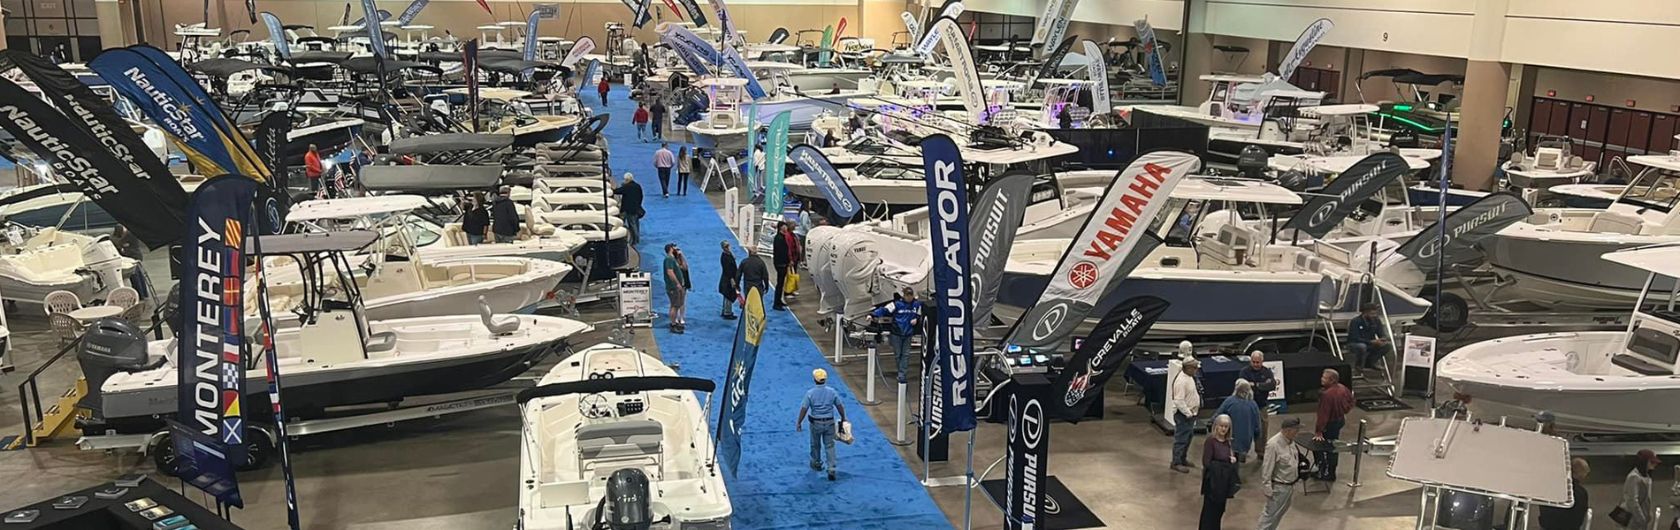 Come see ugo® at the Jacksonville Boat Show!